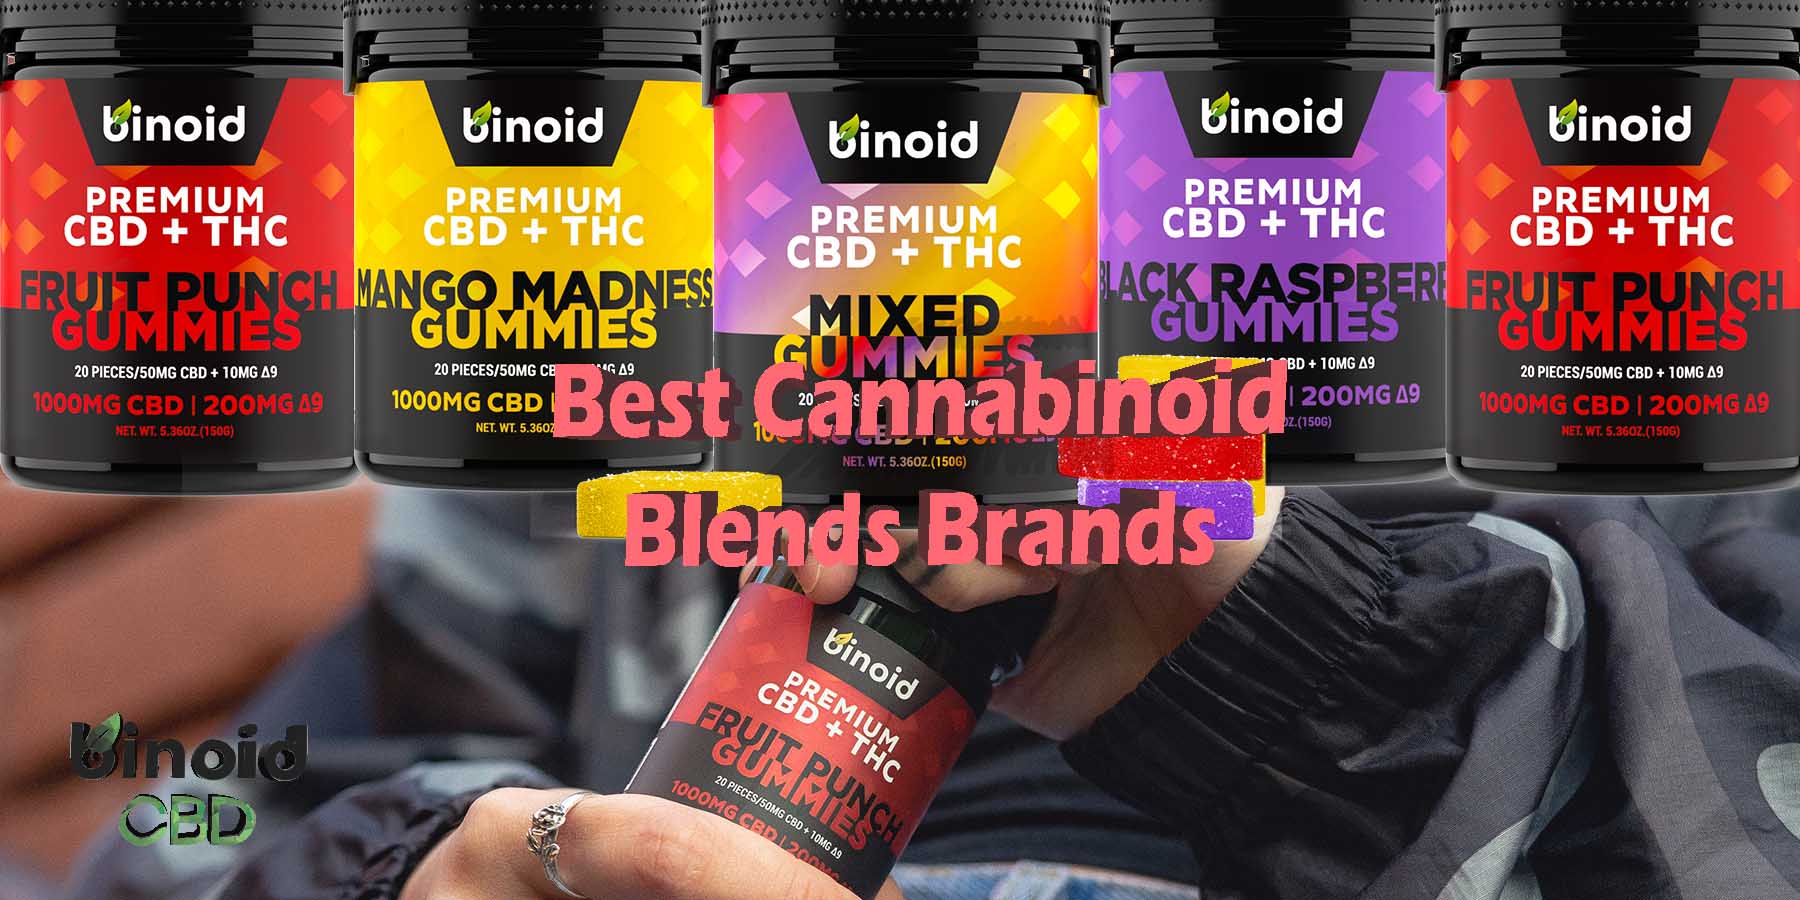 Best Cannabinoid Blends Brands Reviews of Top Vapes Best Disposable Vape 2 Gram Review Gram Review Take Work Online Best Brand Price Get Near Me Lowest Coupon Discount Store Show